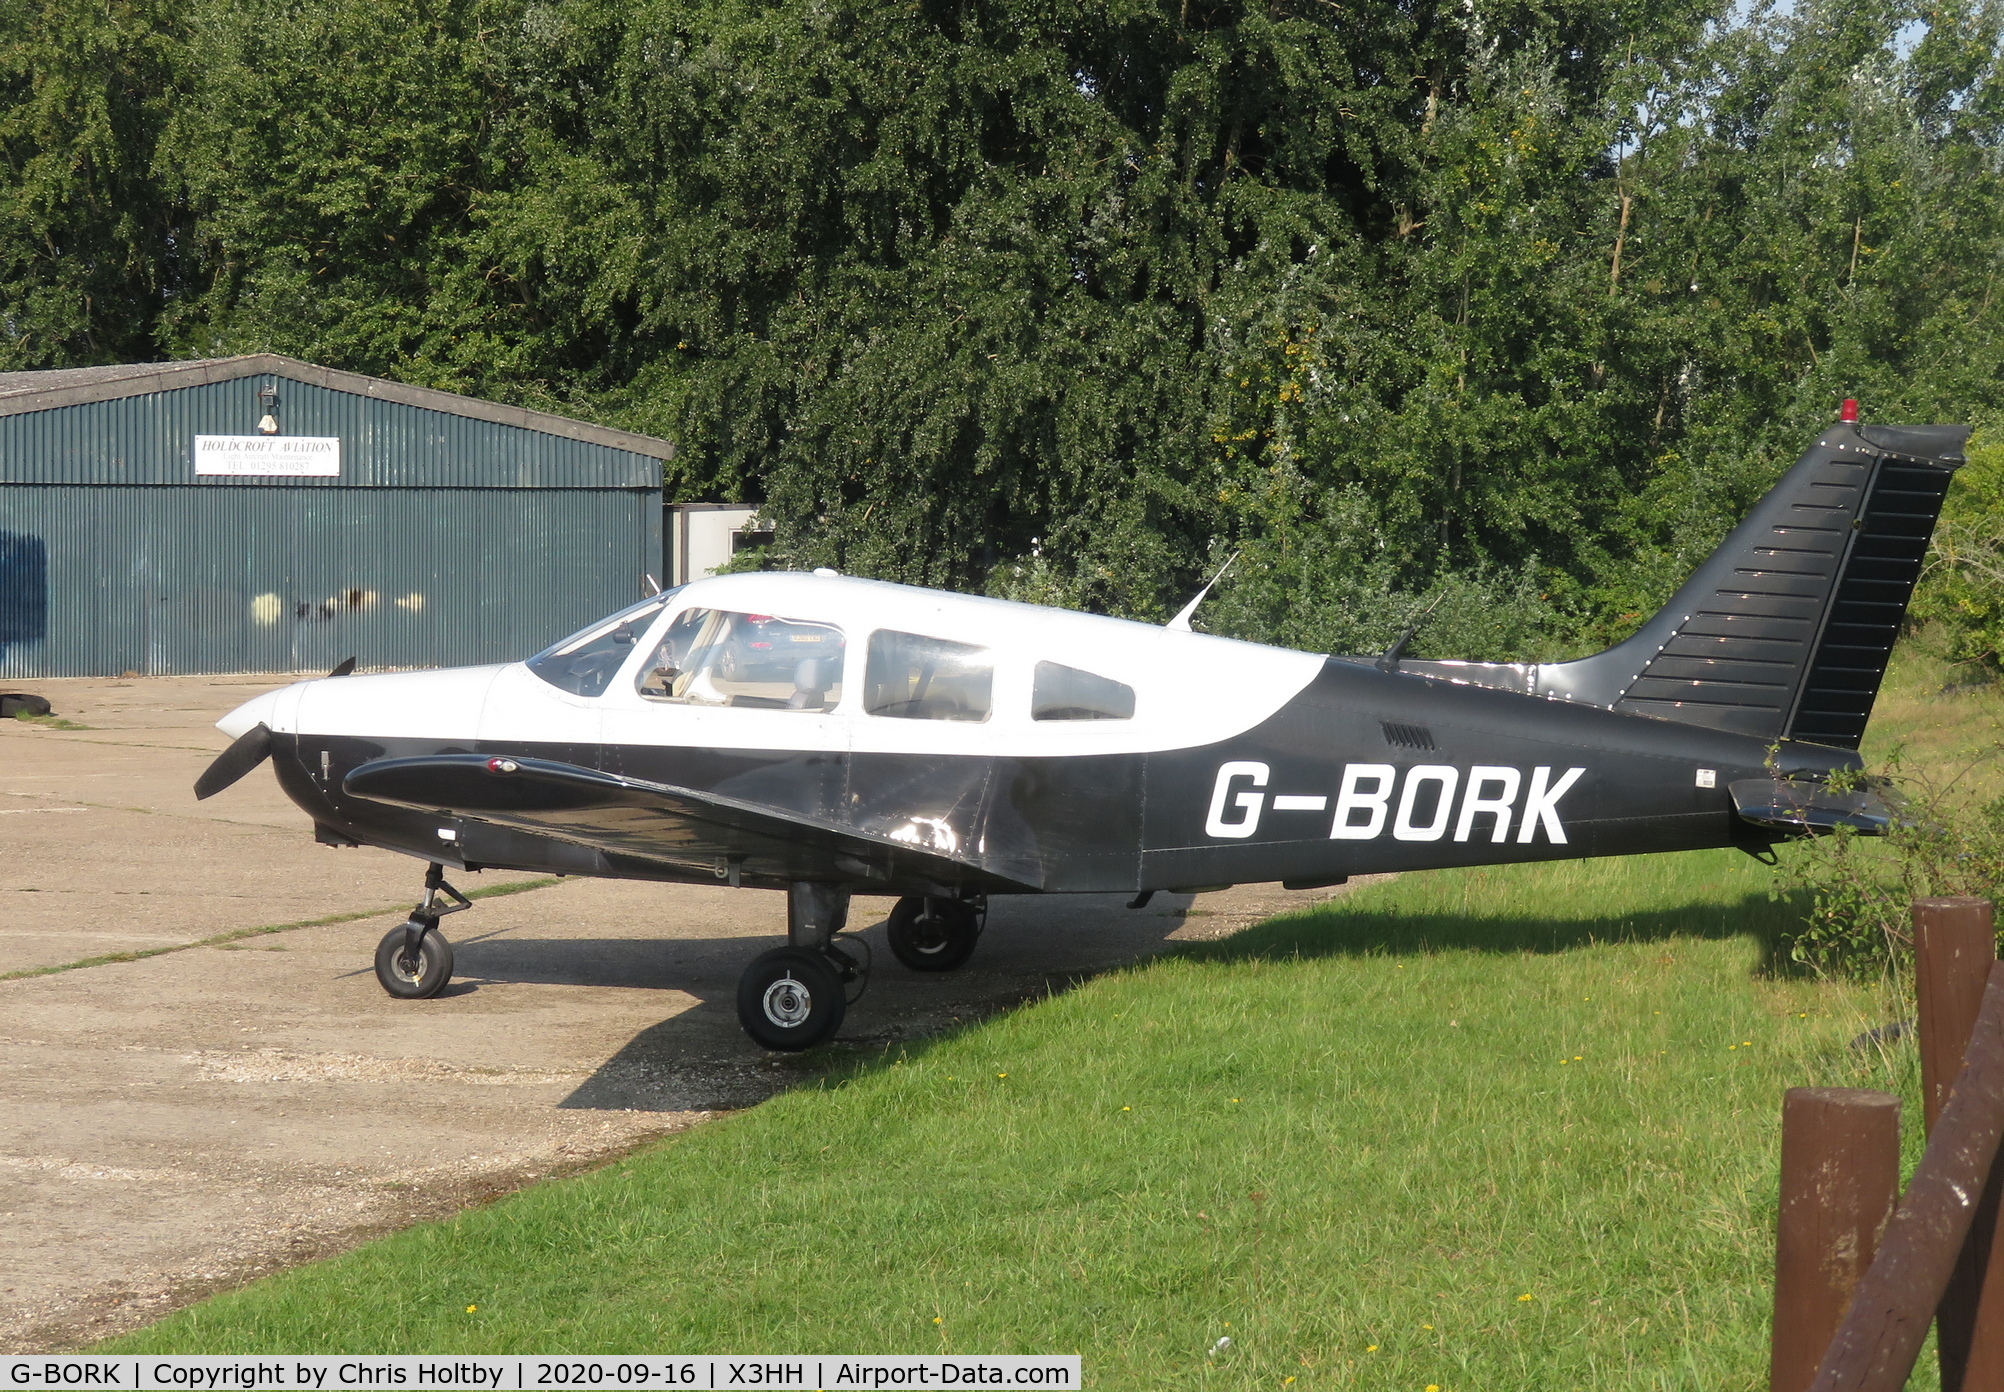 G-BORK, 1981 Piper PA-28-161 Cherokee Warrior II C/N 28-8116095, Visiting nearby airfield to its base at Turweston, parked at Hinton-in-the-Hedges